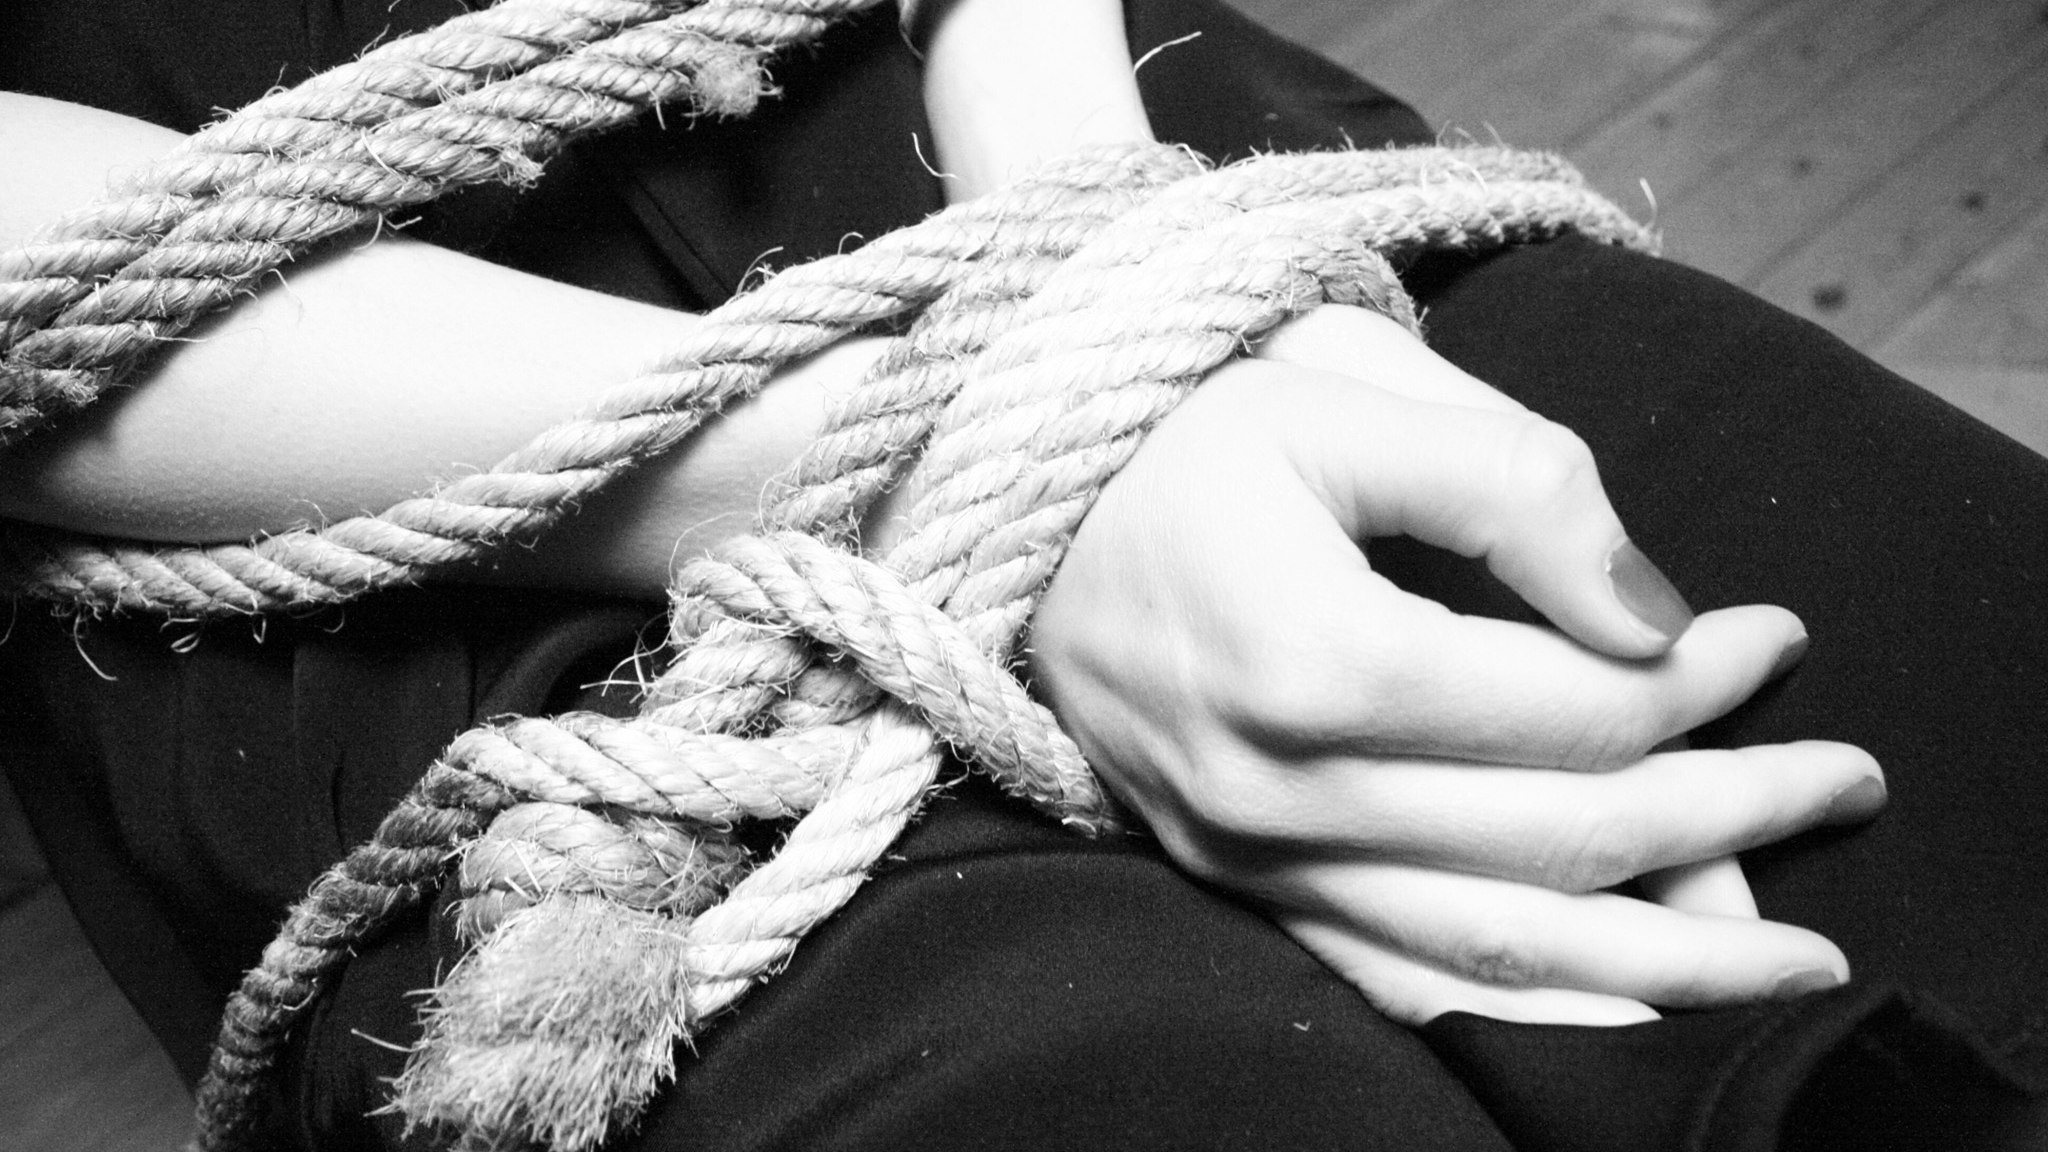 Midsection Of Woman Tied Up With Rope - stock photo